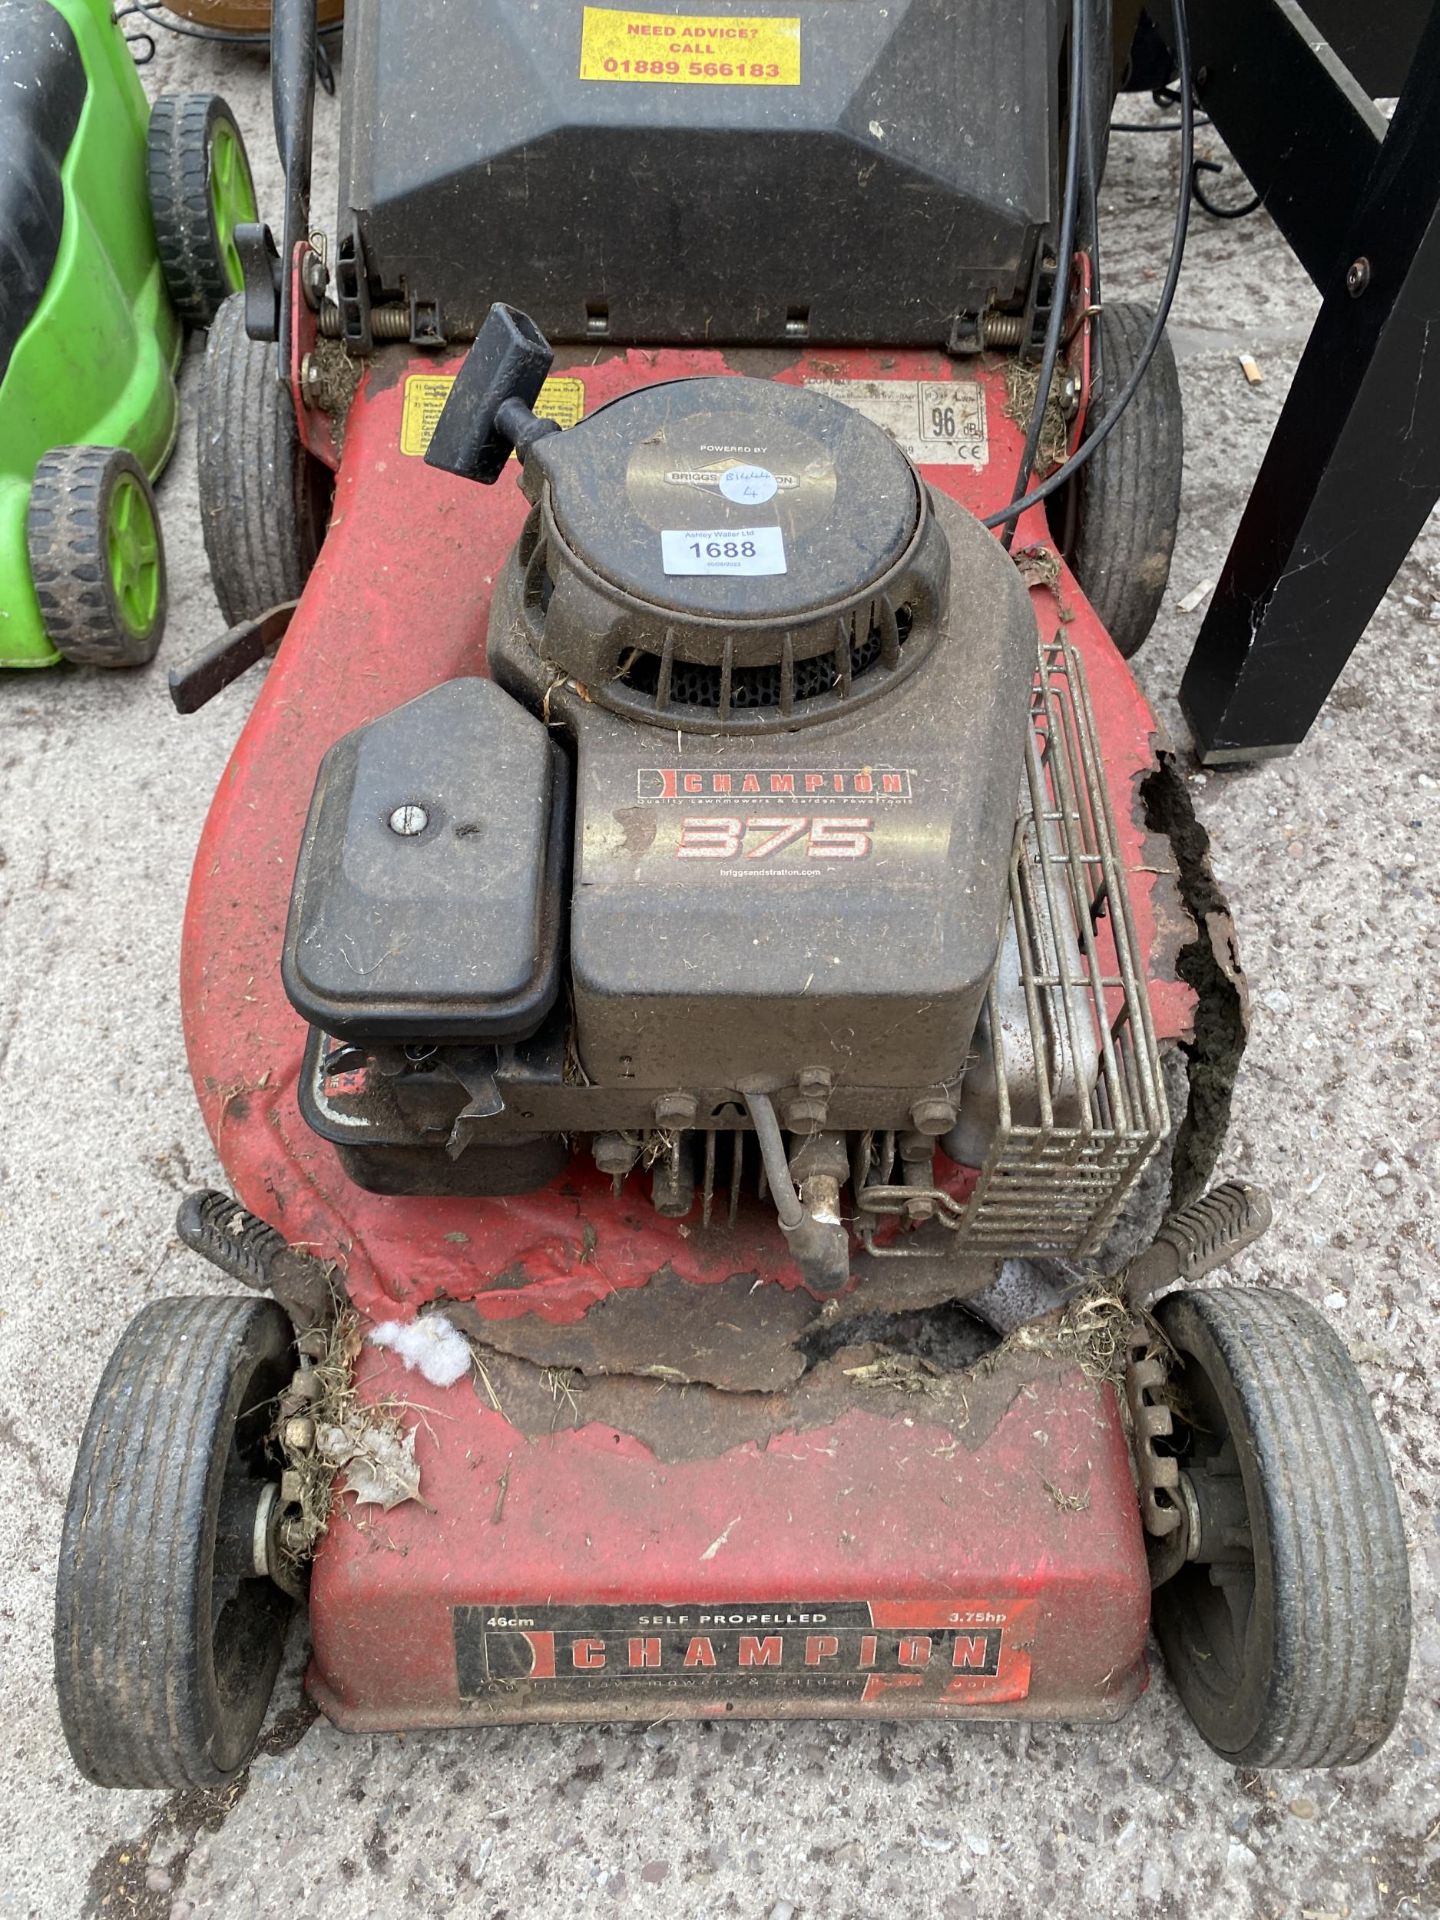 A SELF PROPELLED CHAMPION 375 PETROL LAWN MOWER WITH GRASS BOX (LARGE HOLE TO THE DECK) - Bild 2 aus 3